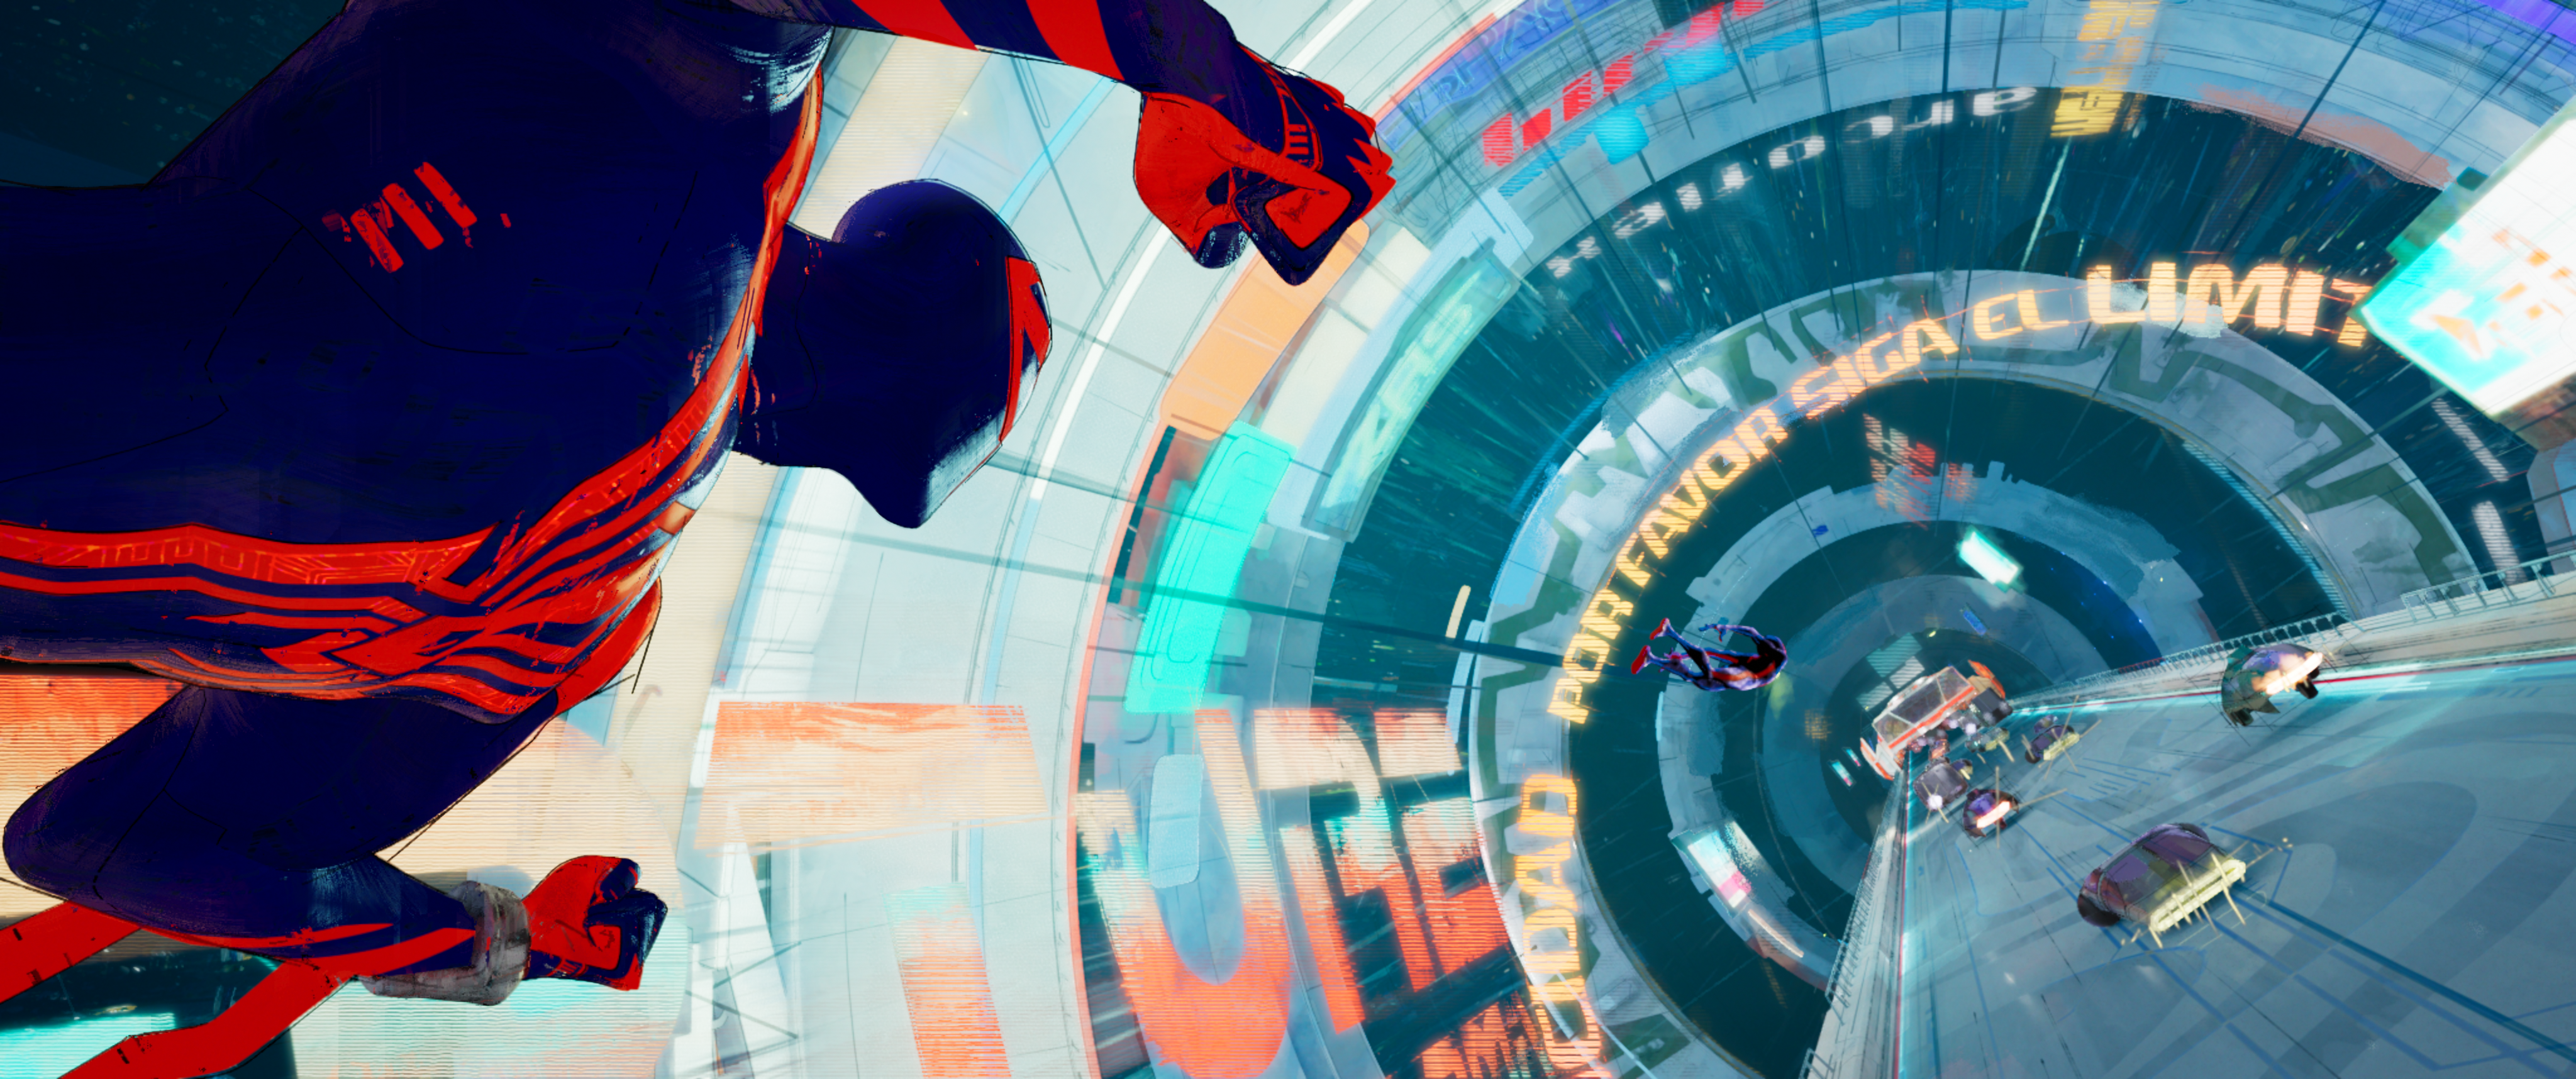 Spider-Man™: Across The Spider-Verse image 6